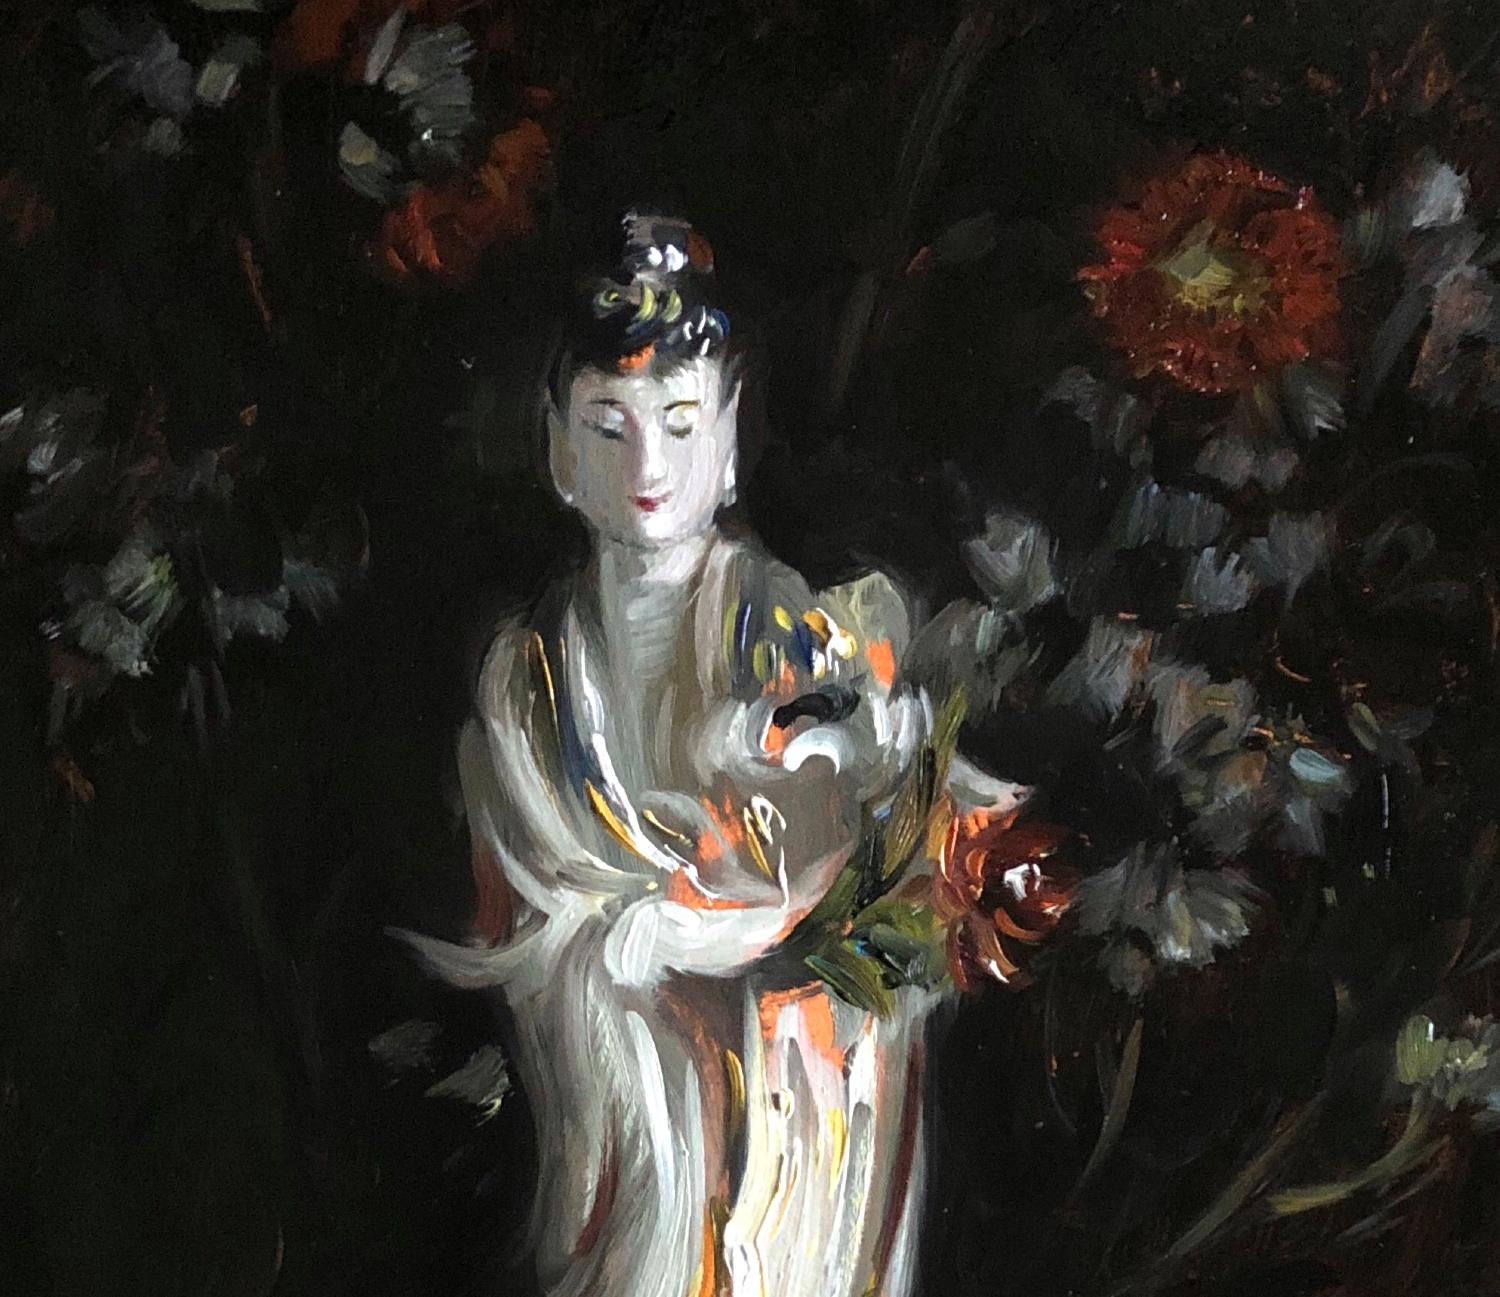 Zen is a 14 x 9 Oil Painting by  European /Croatian artist Tina Orsolic Dalessio whois  classically trained.

Tina Orsolic Dalessio is a figurative  and still-life painter born in Zagreb, Croatia.  She received her formal academic training at the